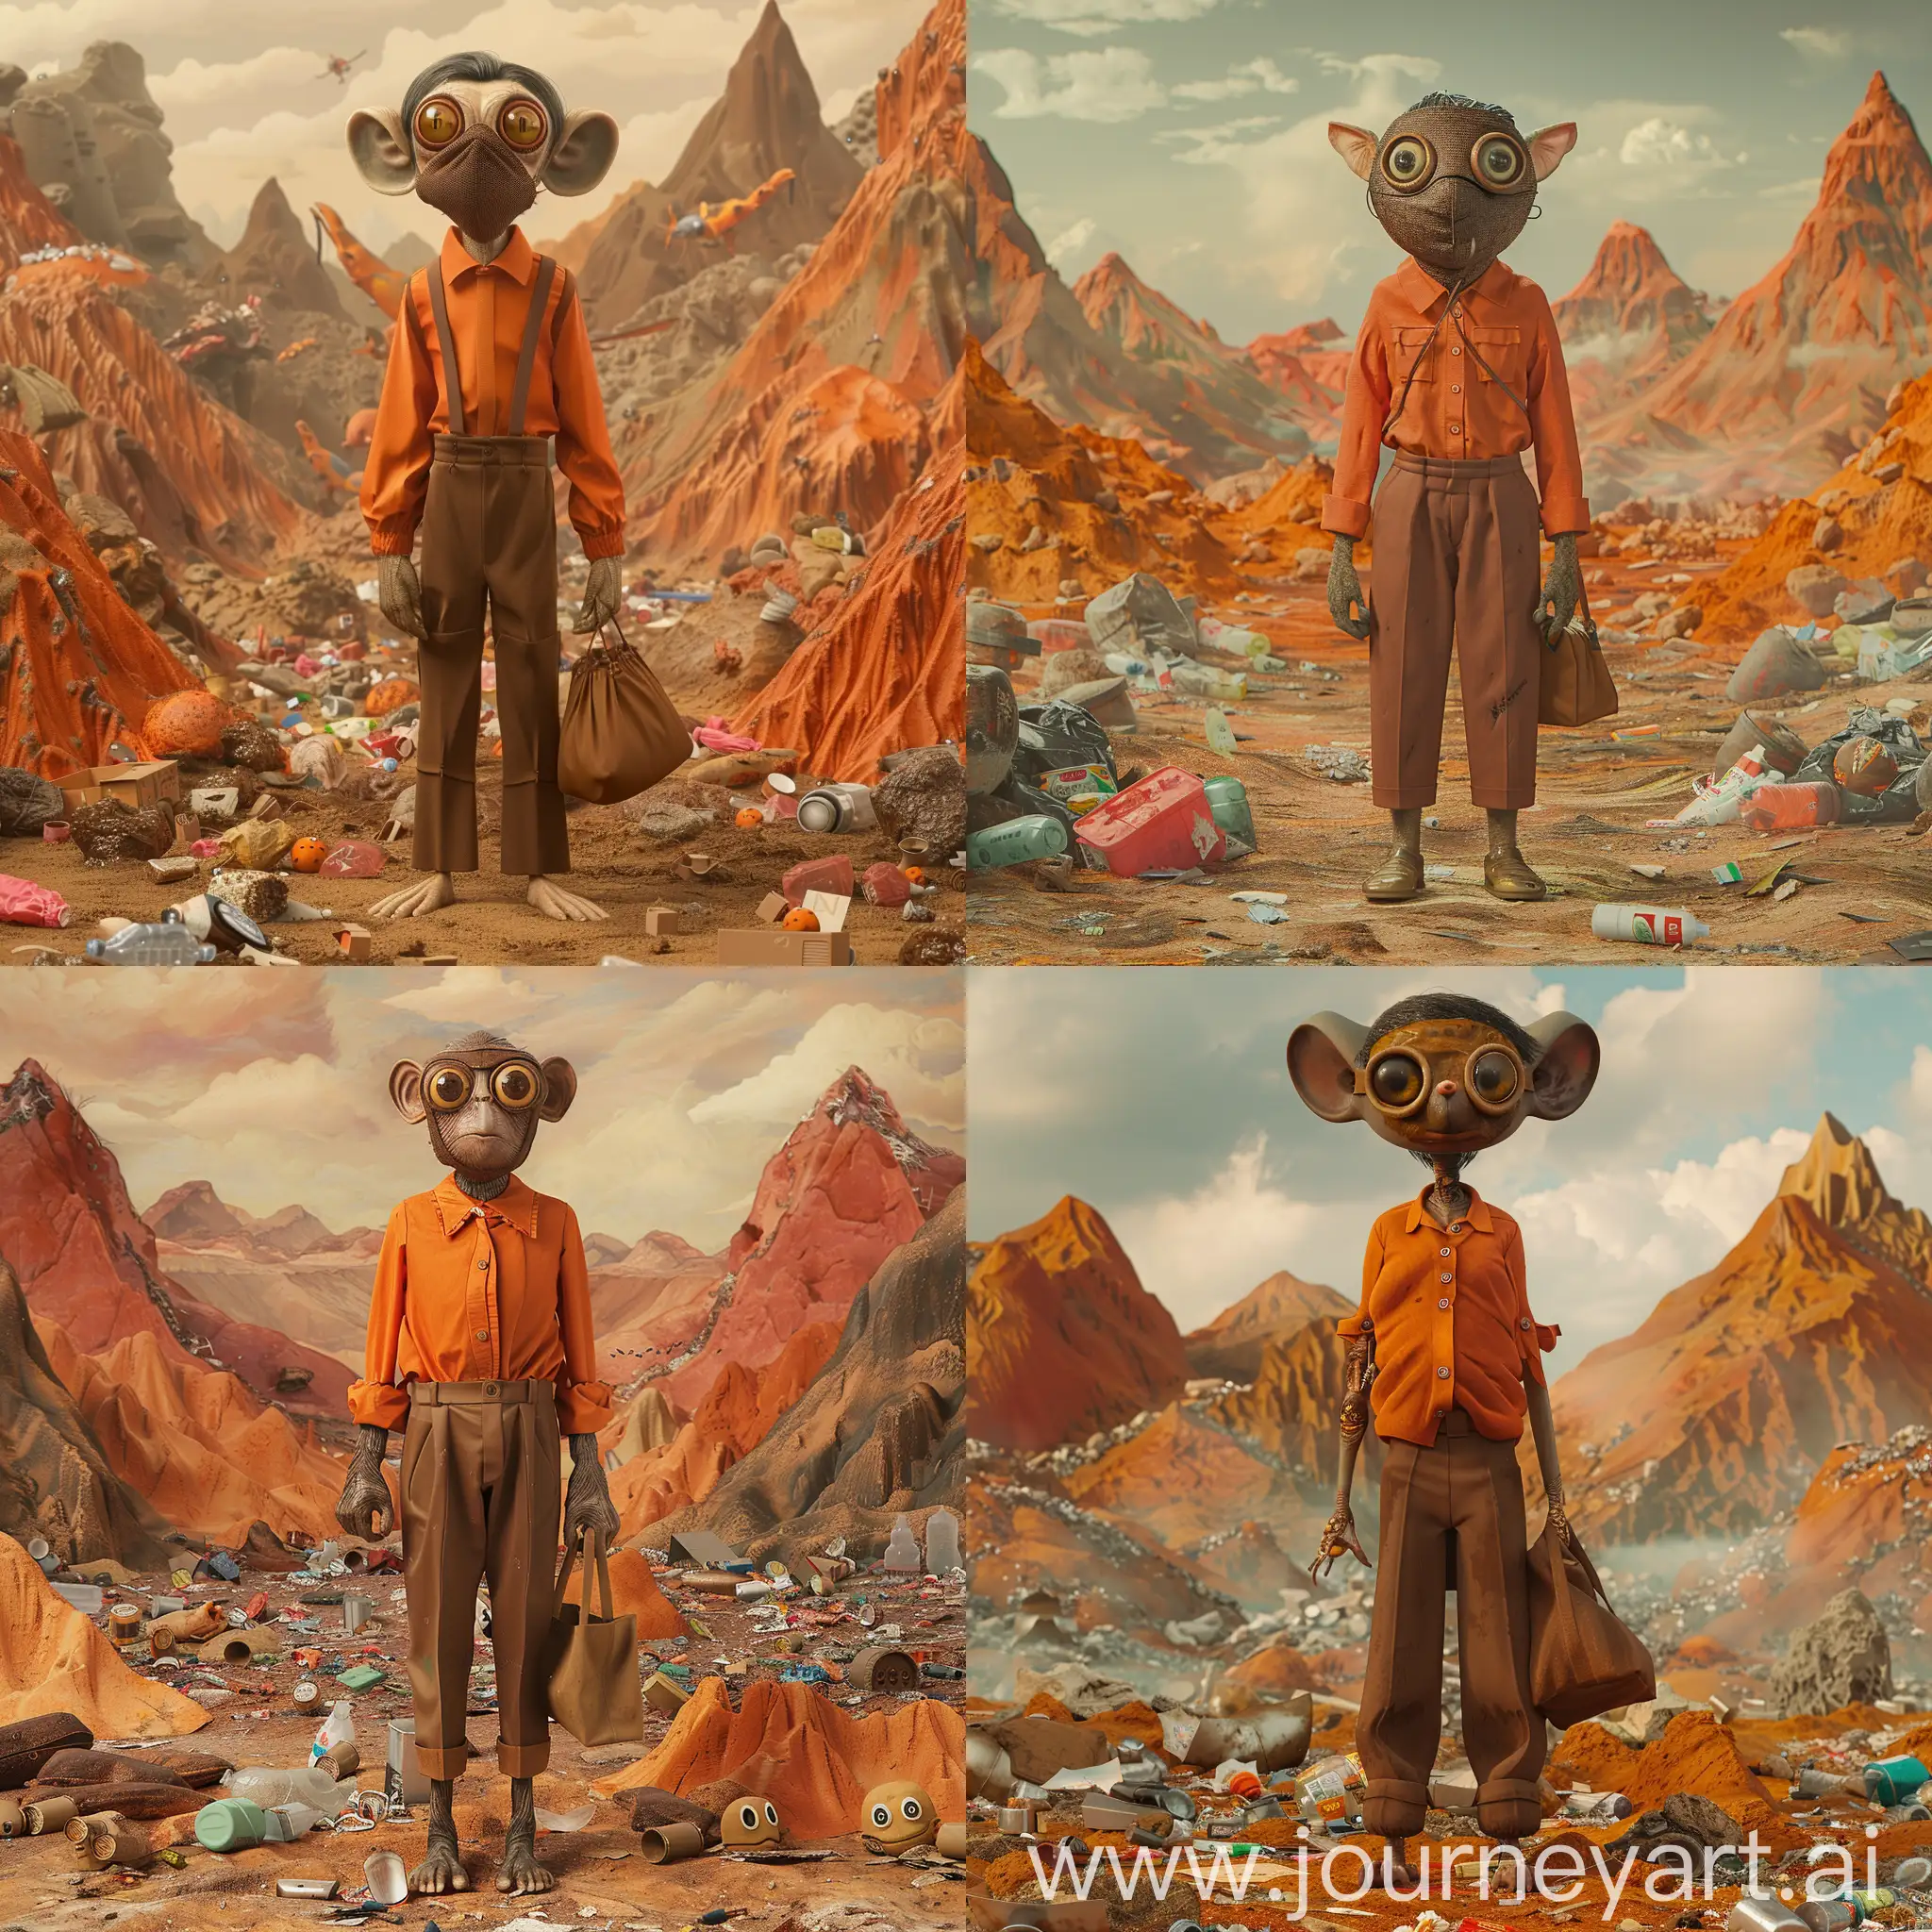 Human look a like creature, short legs, long arms to the ground, big eyes, brown mask over nose and mouth, big ears, big hands, big foots, orange blouse, brown trousers, small brown bag, living in a word full of trash, brash orange brown mountains